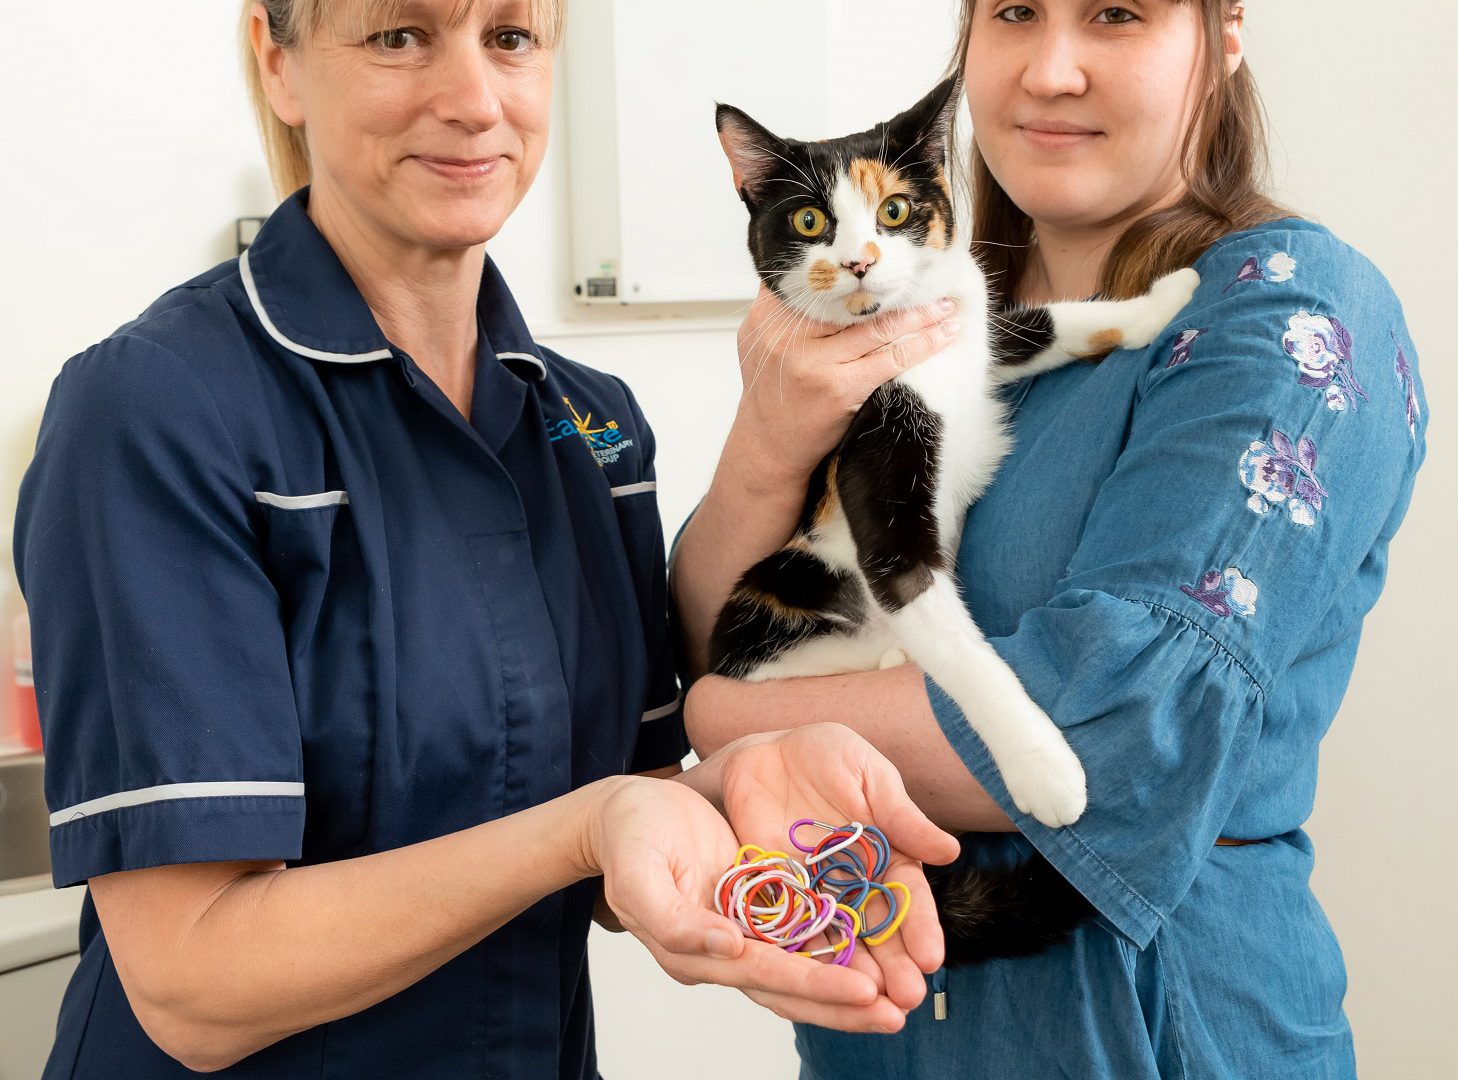 Cat saved by vets after stomach found to be full with 50 hair bands